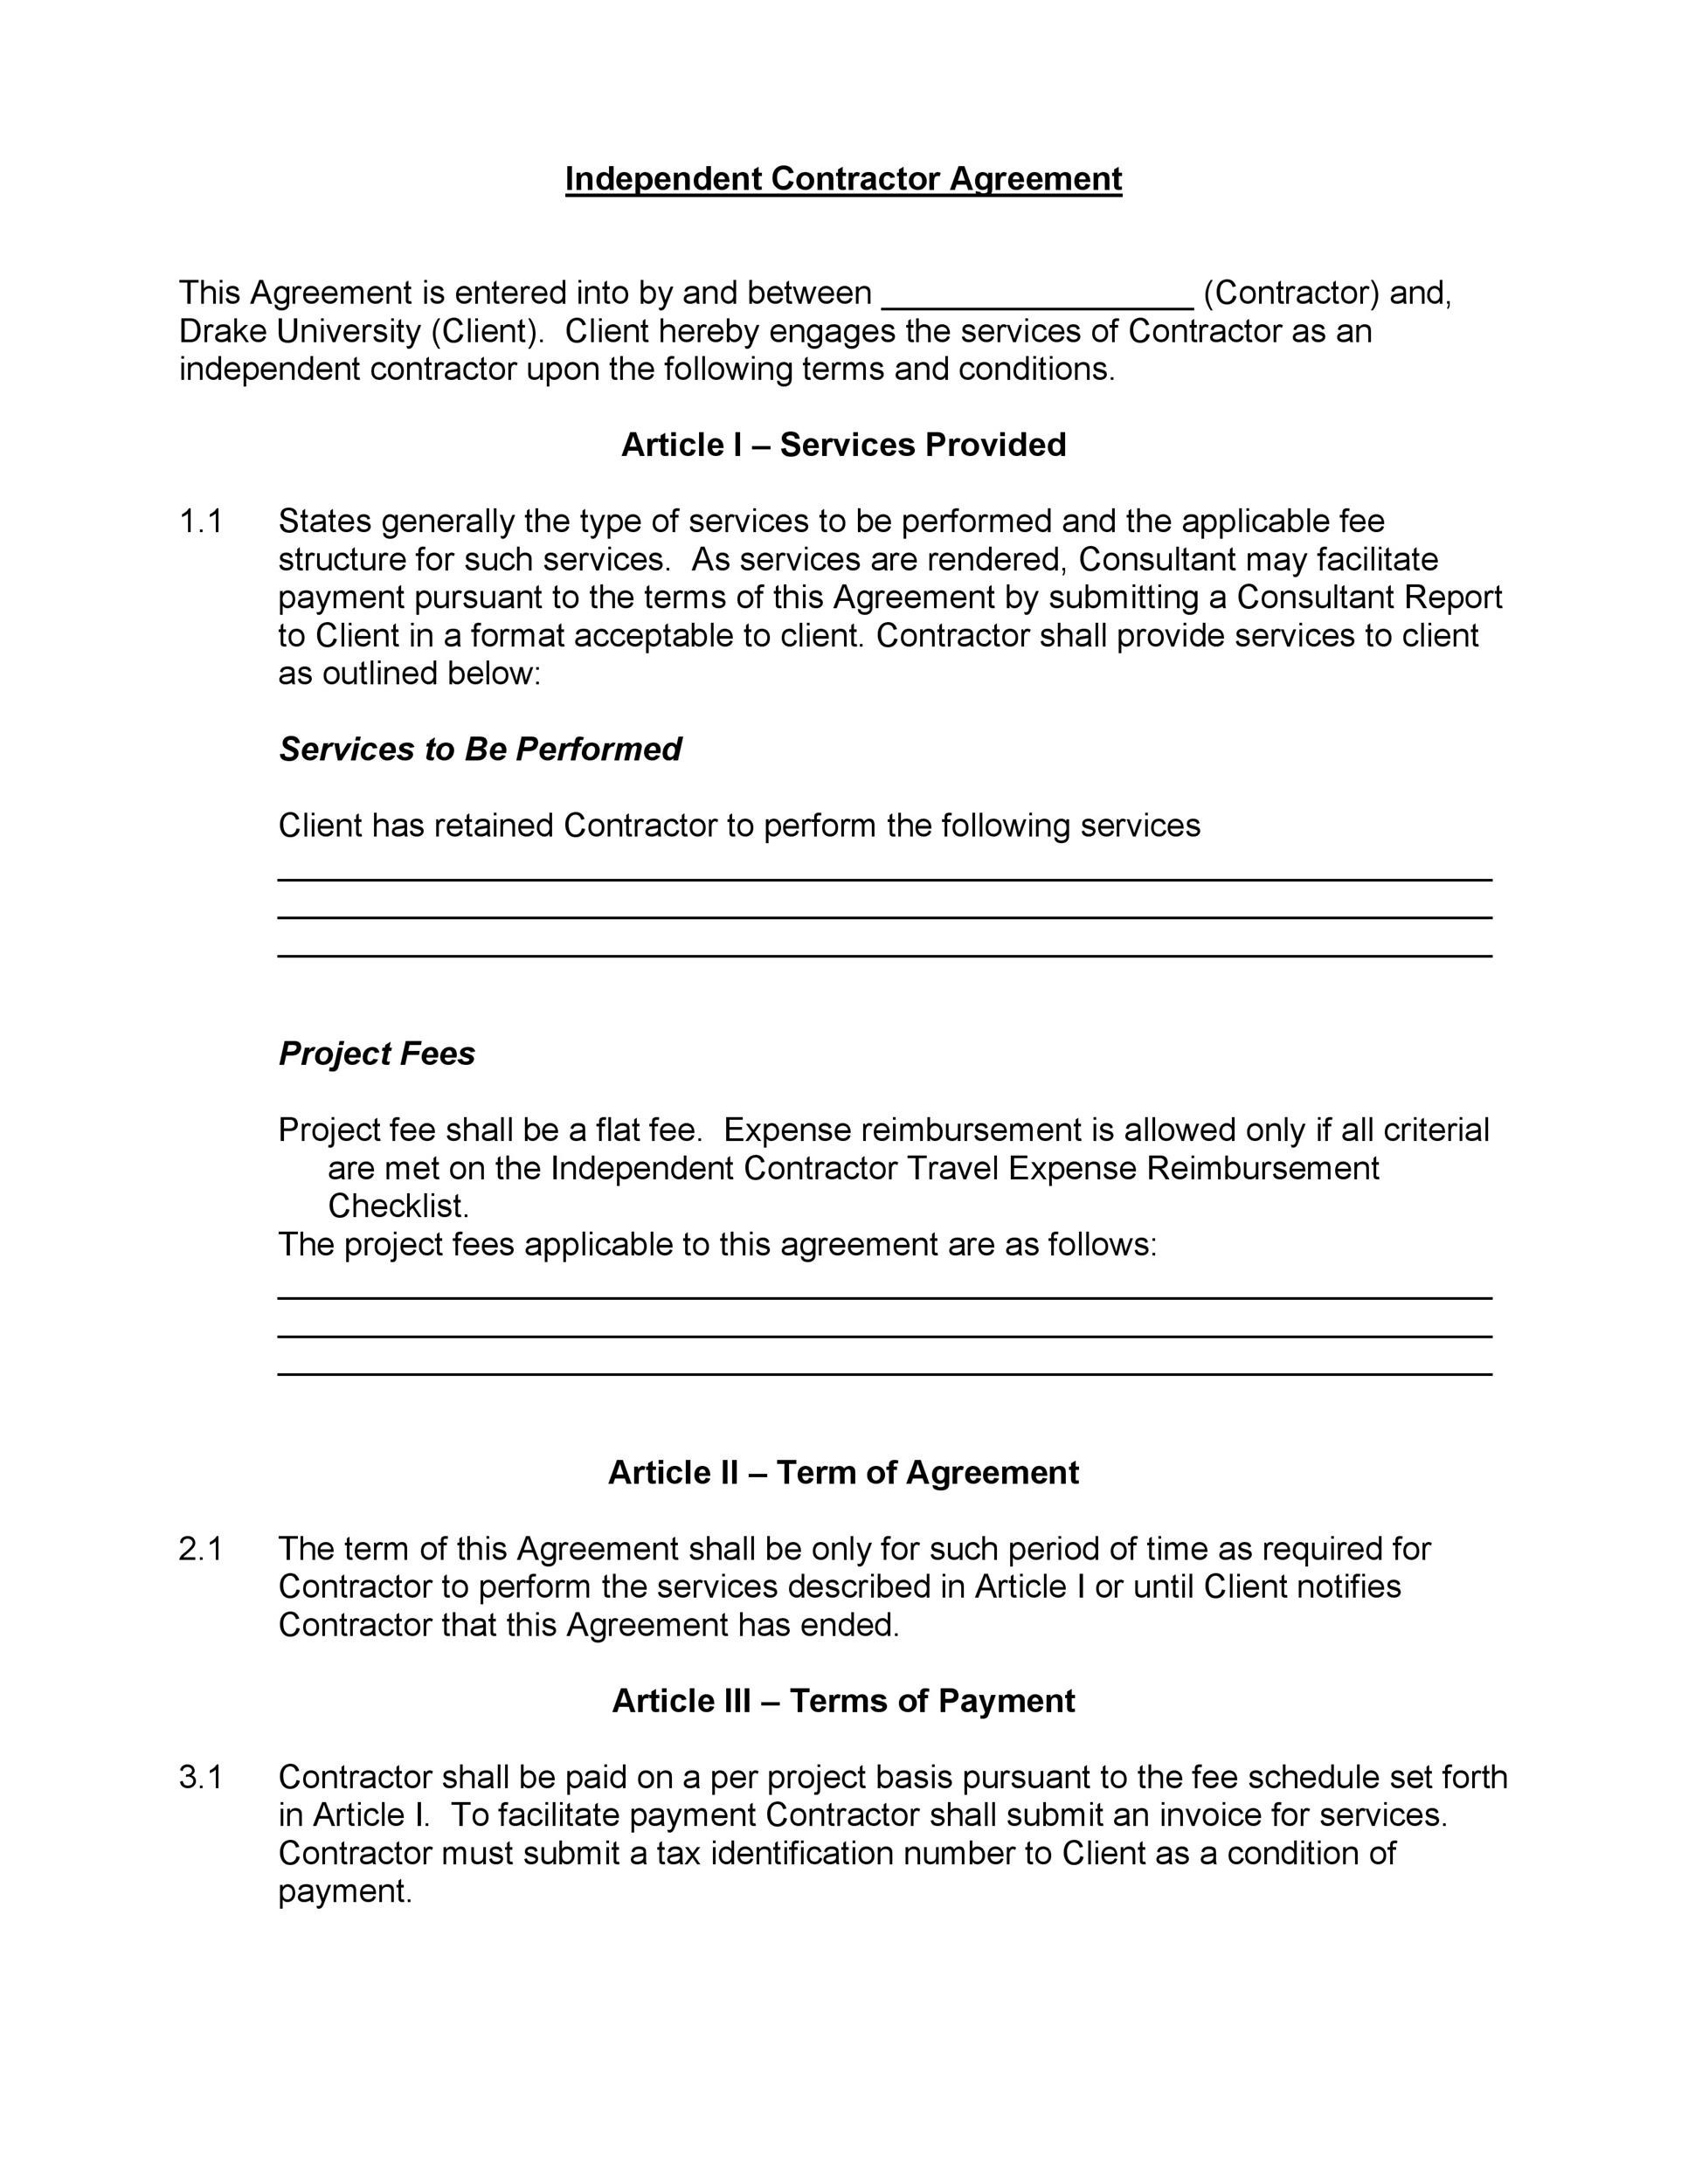 50-free-independent-contractor-agreement-forms-templates